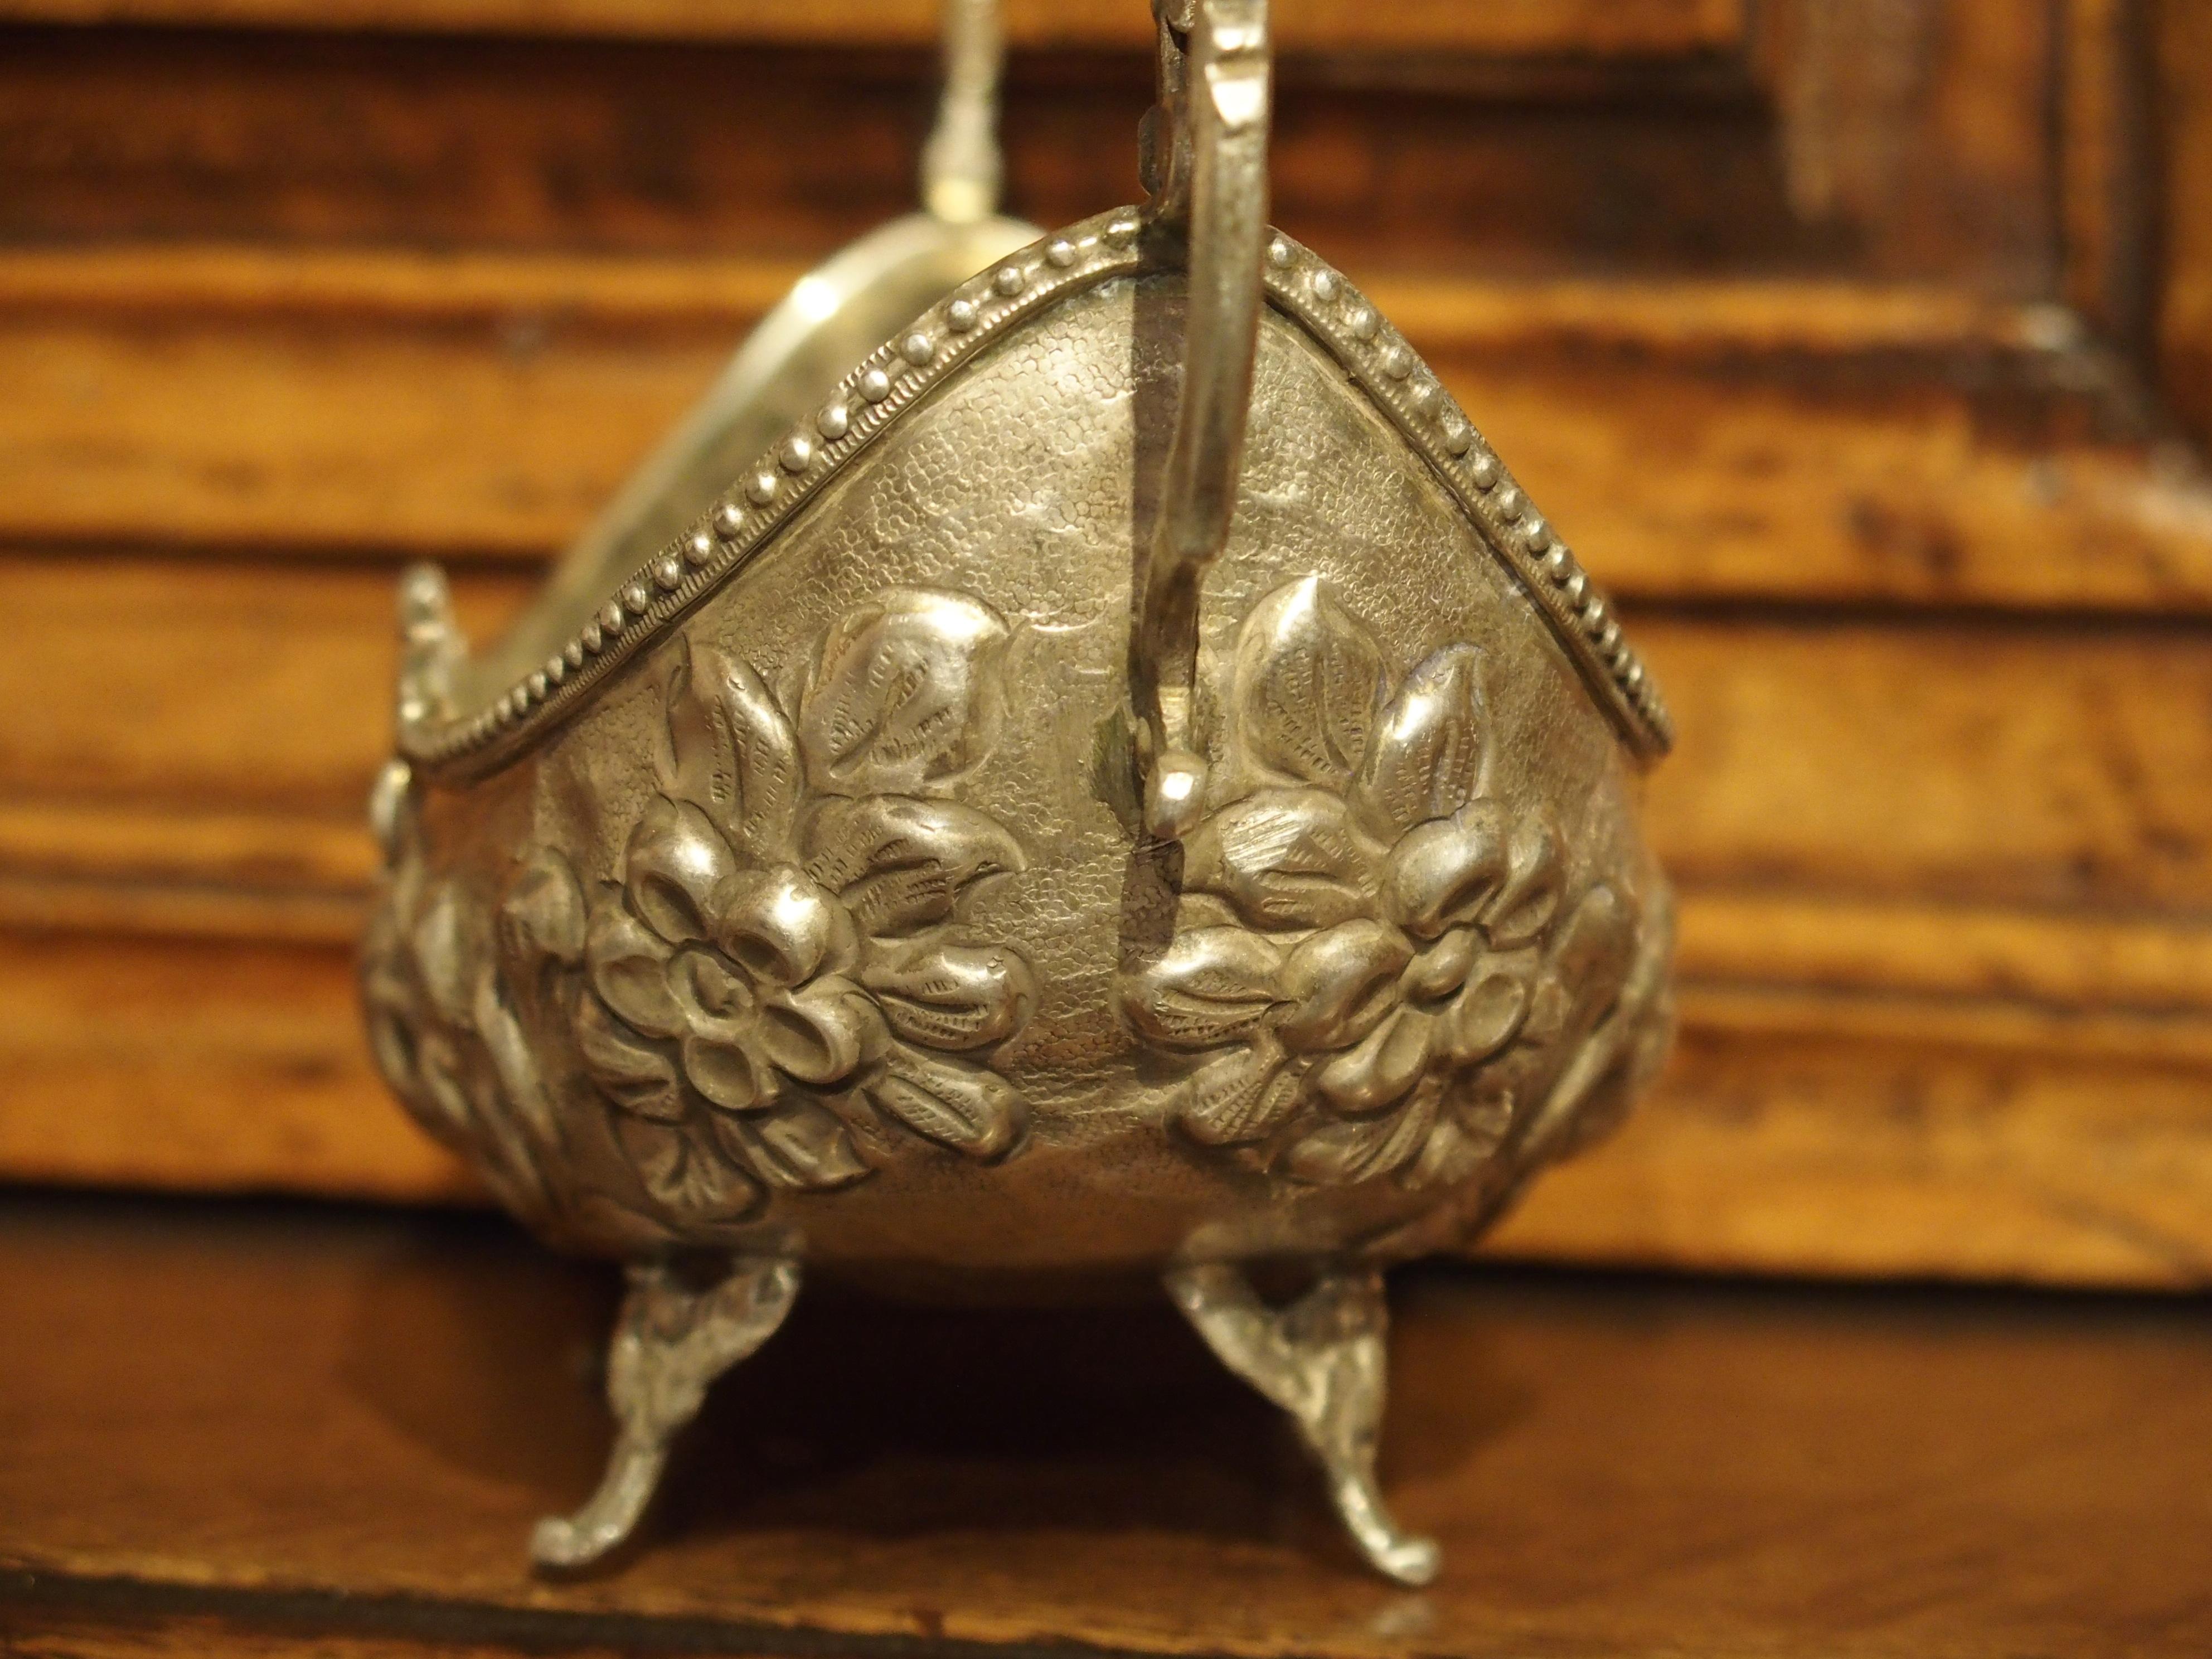 Approximate 270 grams.

This elegant small and detailed antique sterling silver bowl from Germany dates to the start of the 20th century. It has a gondola shape with demi figure arms of stylized dolphins and C-Scrolls at either end. Gadrooned